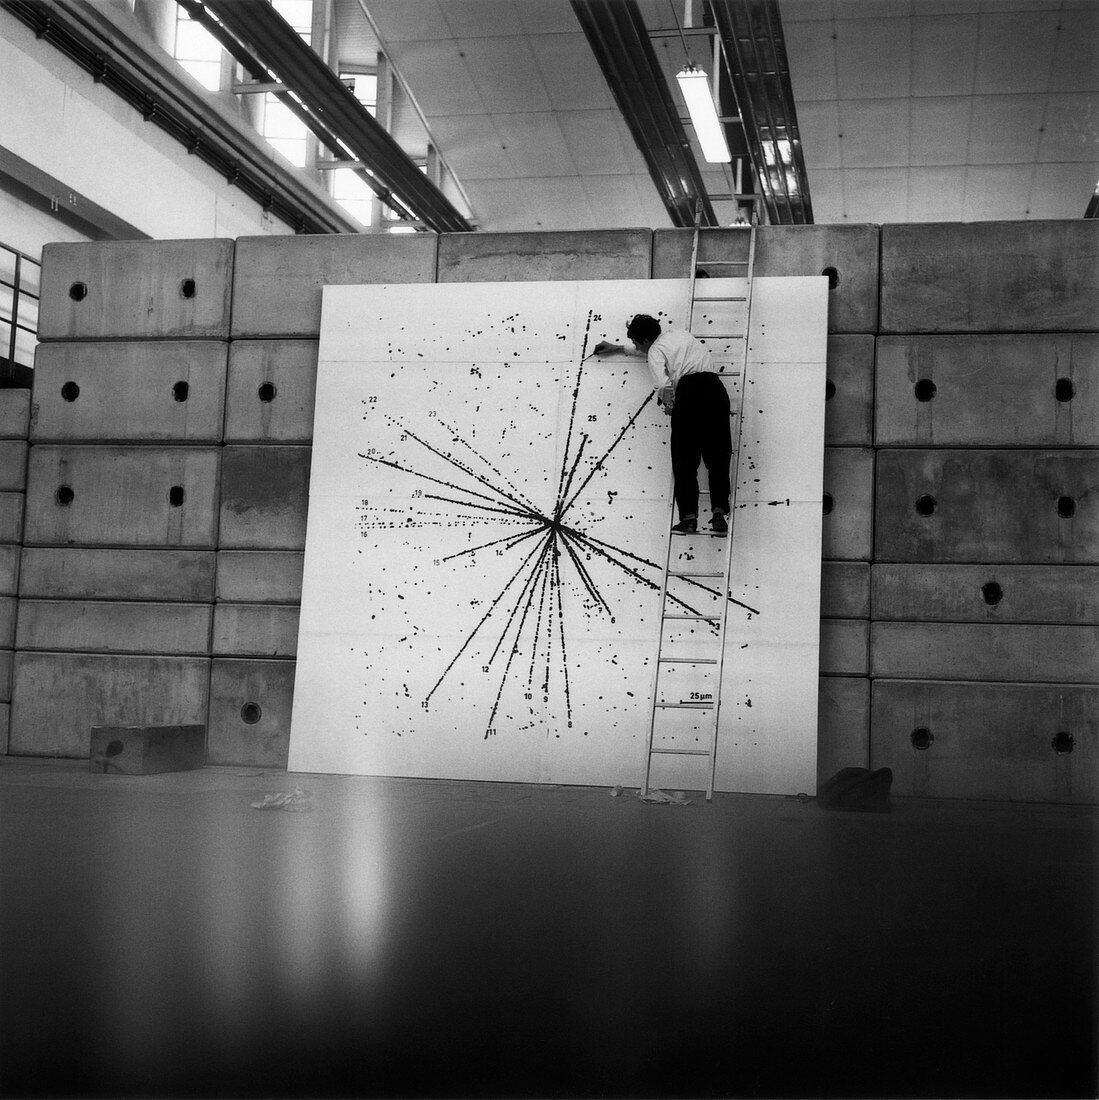 Early CERN results,1959